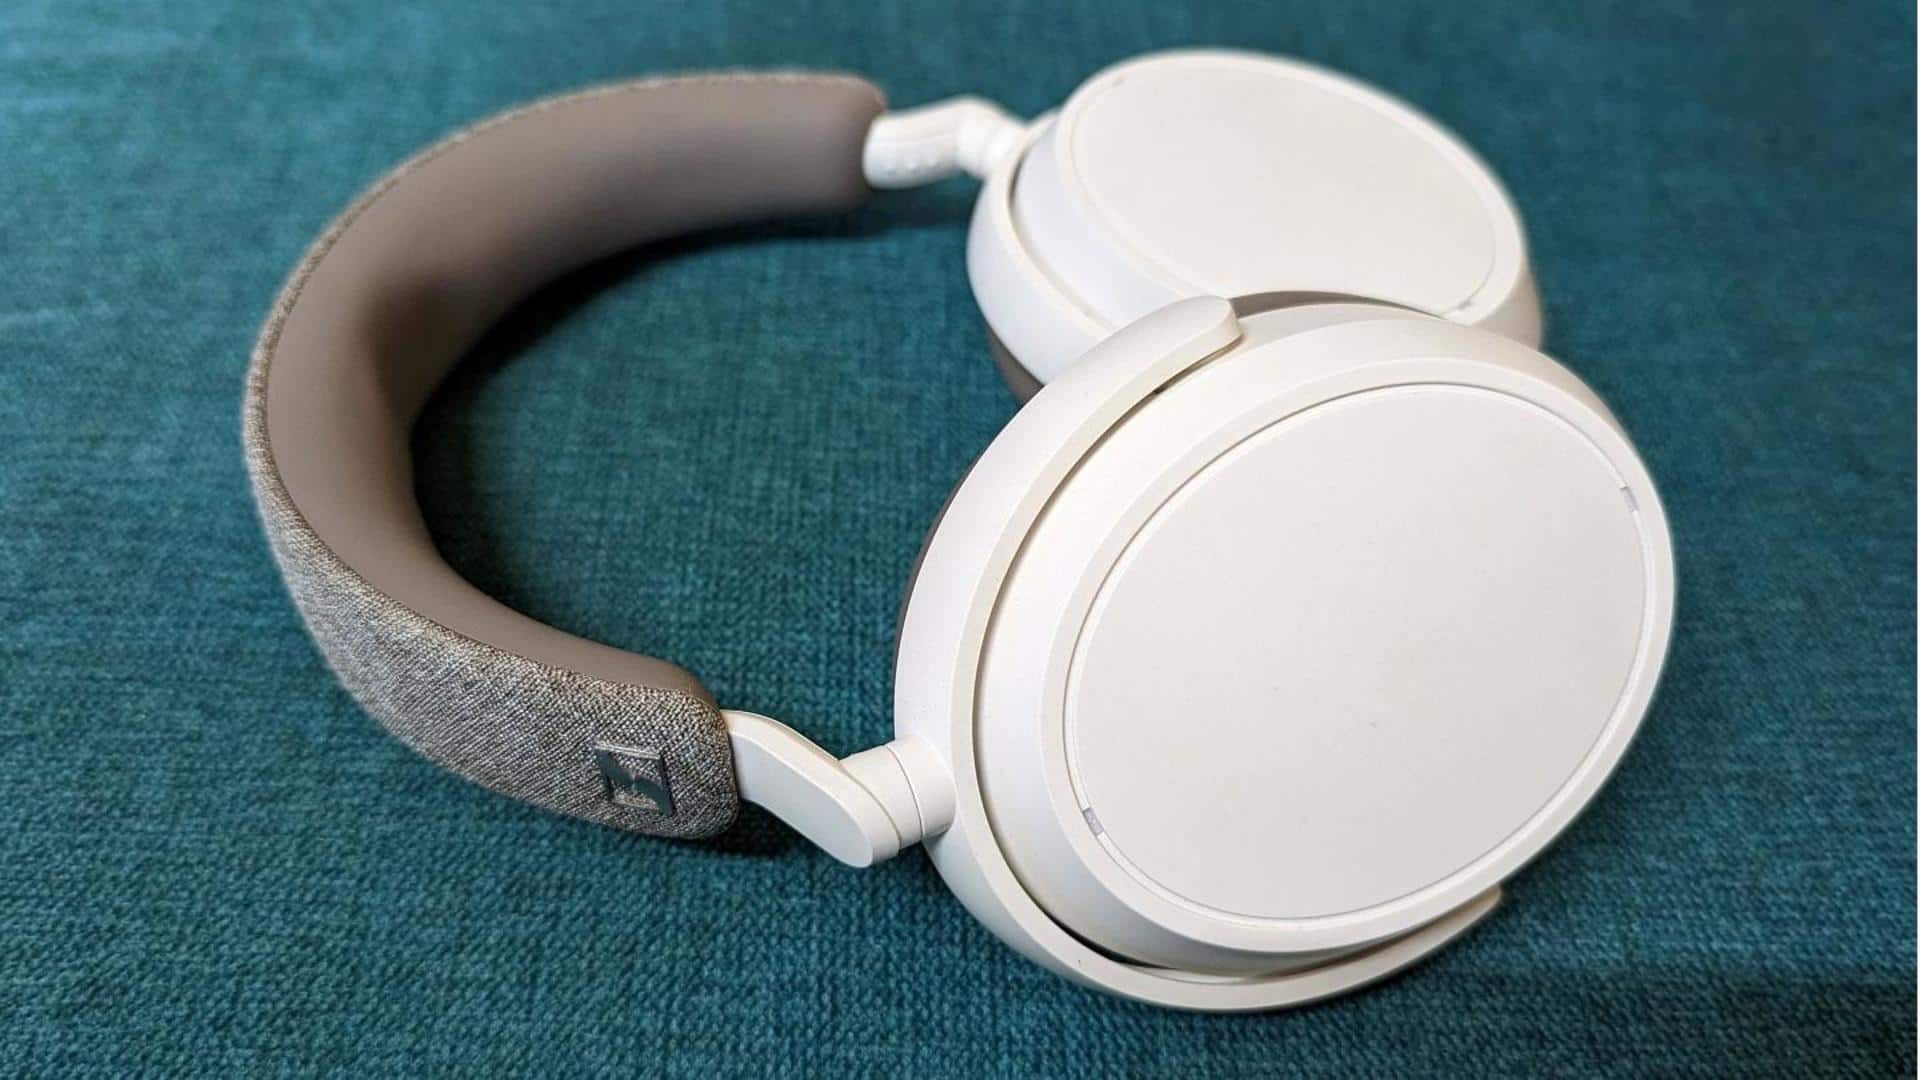 Sennheiser Momentum 4 Wireless headphones review: Watch out, Sony WH-1000XM5